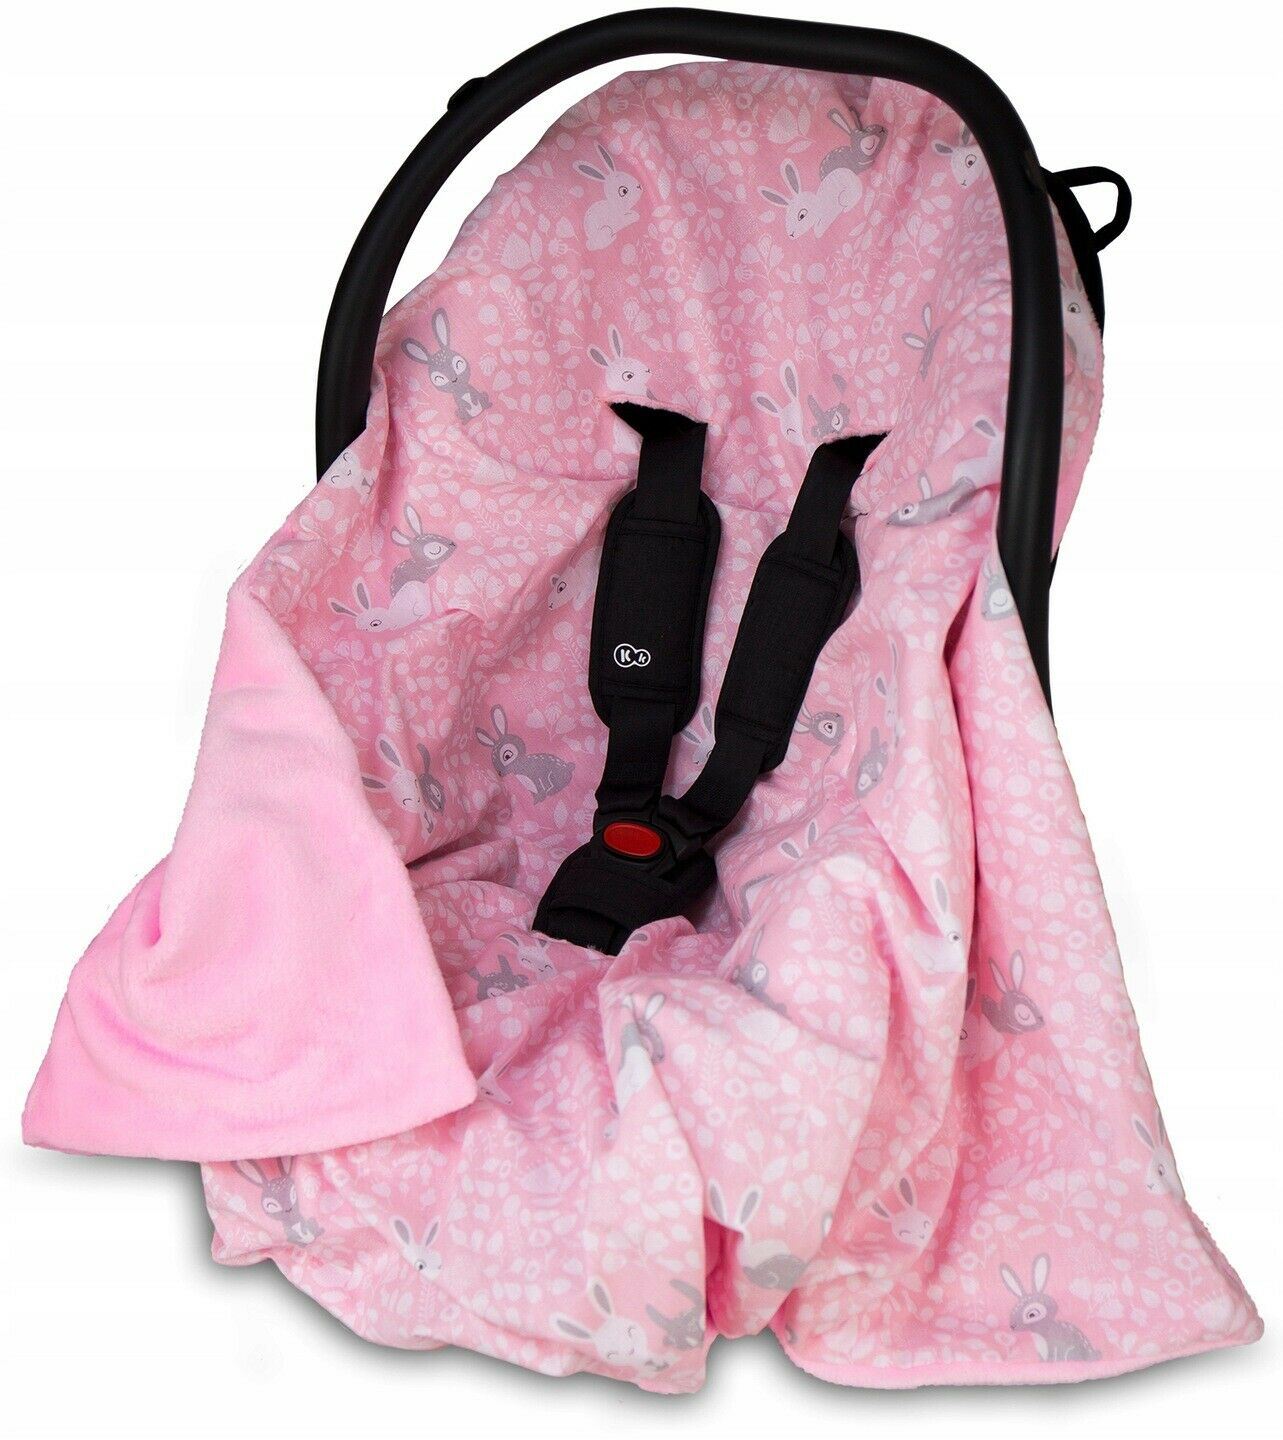 Baby Blanket Car Seat Reversible Wrap Plush Soft Double Sided Cotton 100X100cm Pink-Pink Bunnies